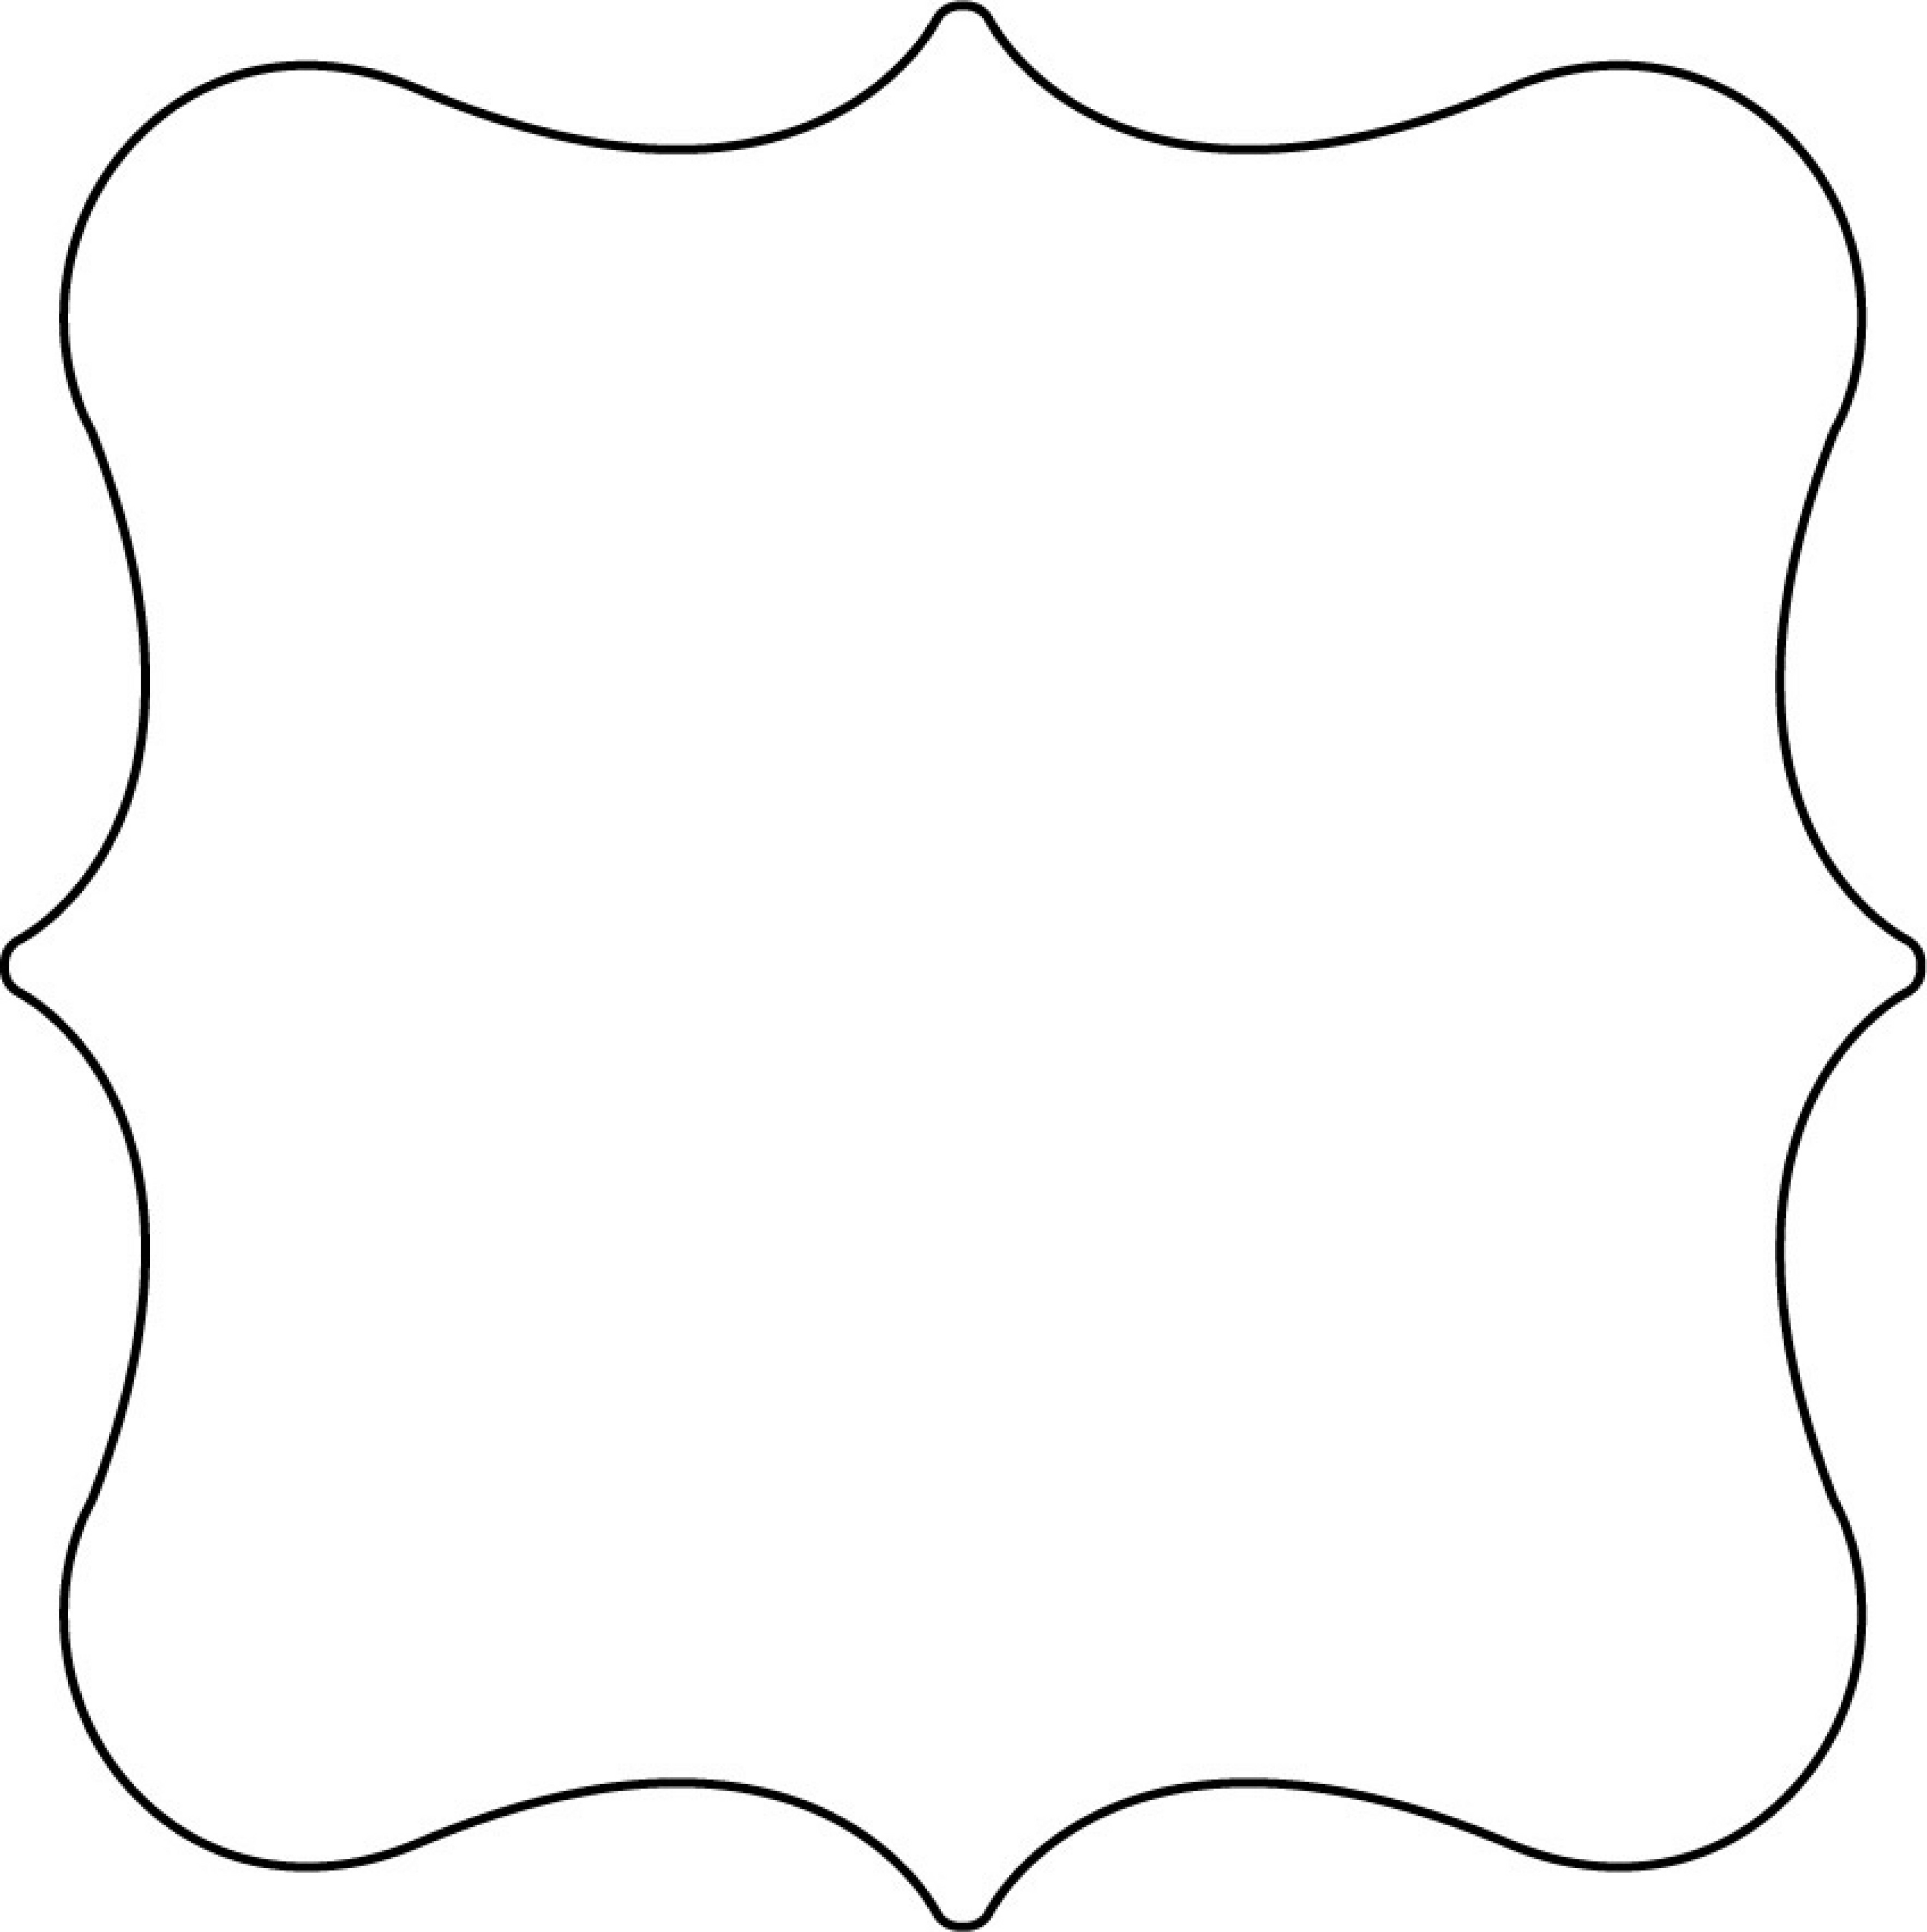 free-printable-shape-templates-page-1-clipart-best-clipart-best